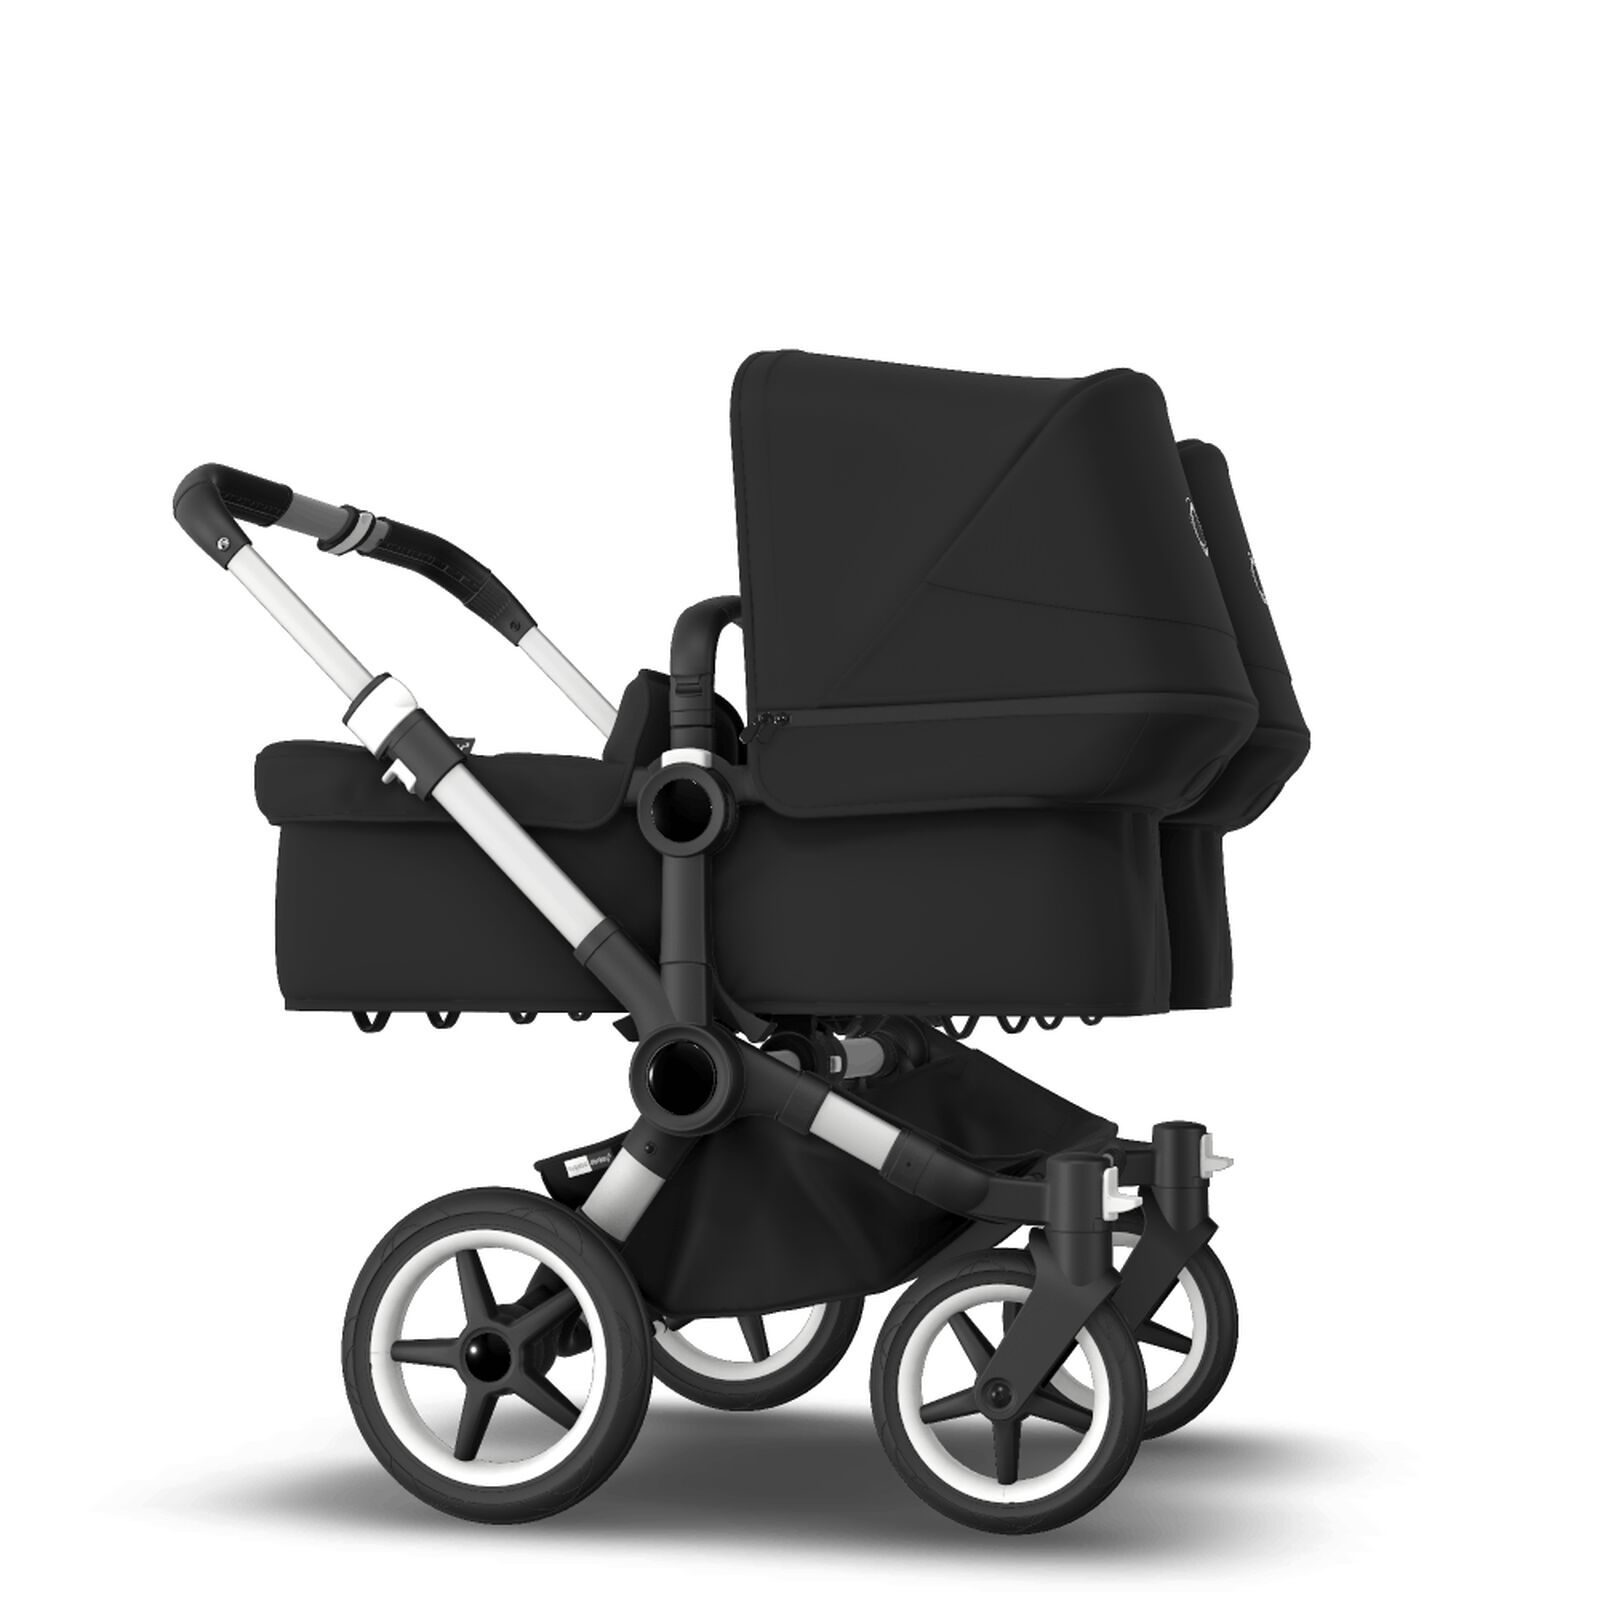 Bugaboo Donkey 3 Twin travel system - View 10